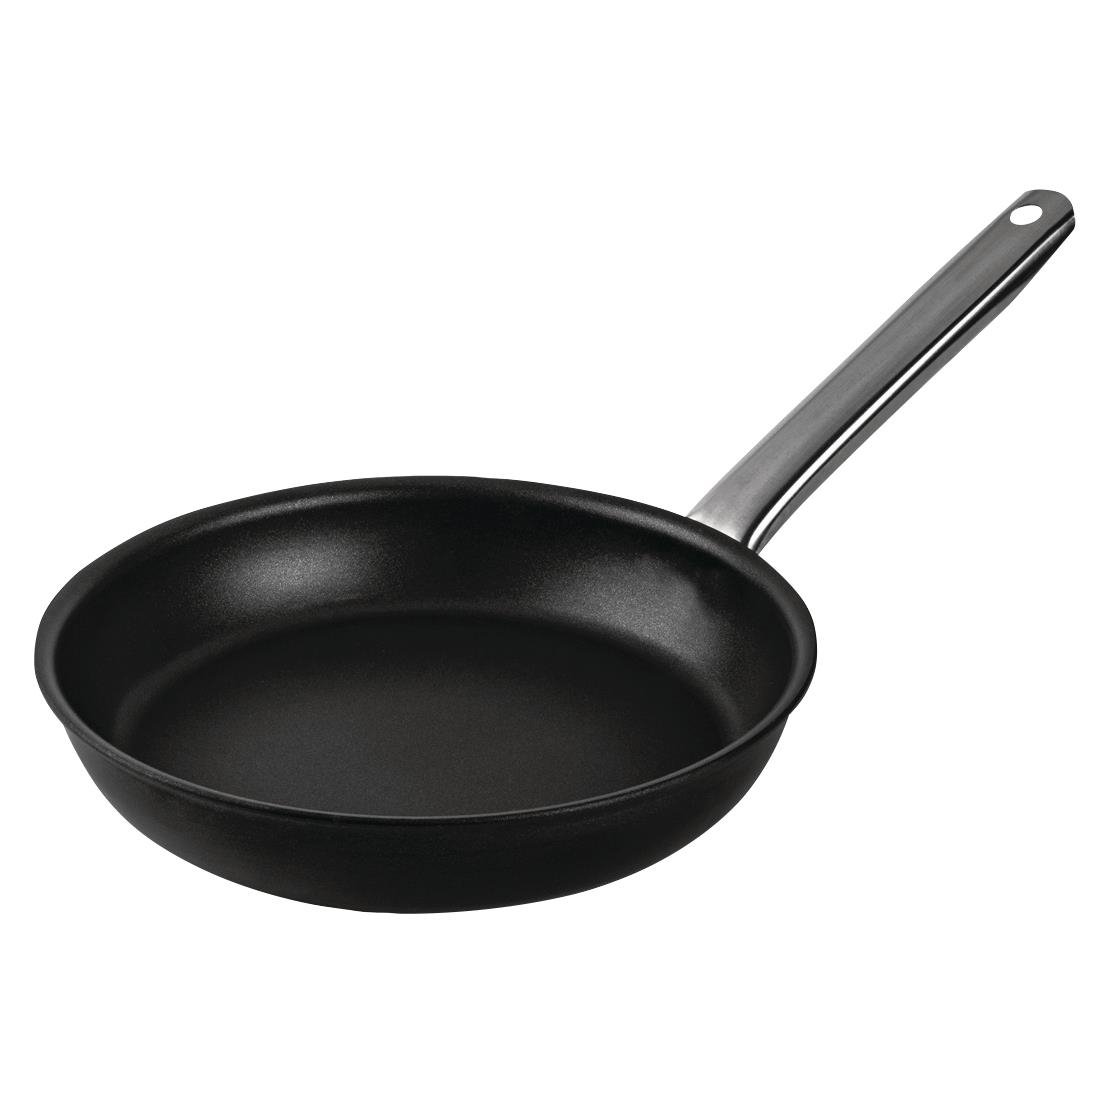 Bourgeat Elite Pro Non Stick Induction Frying Pan 280mm JD Catering Equipment Solutions Ltd